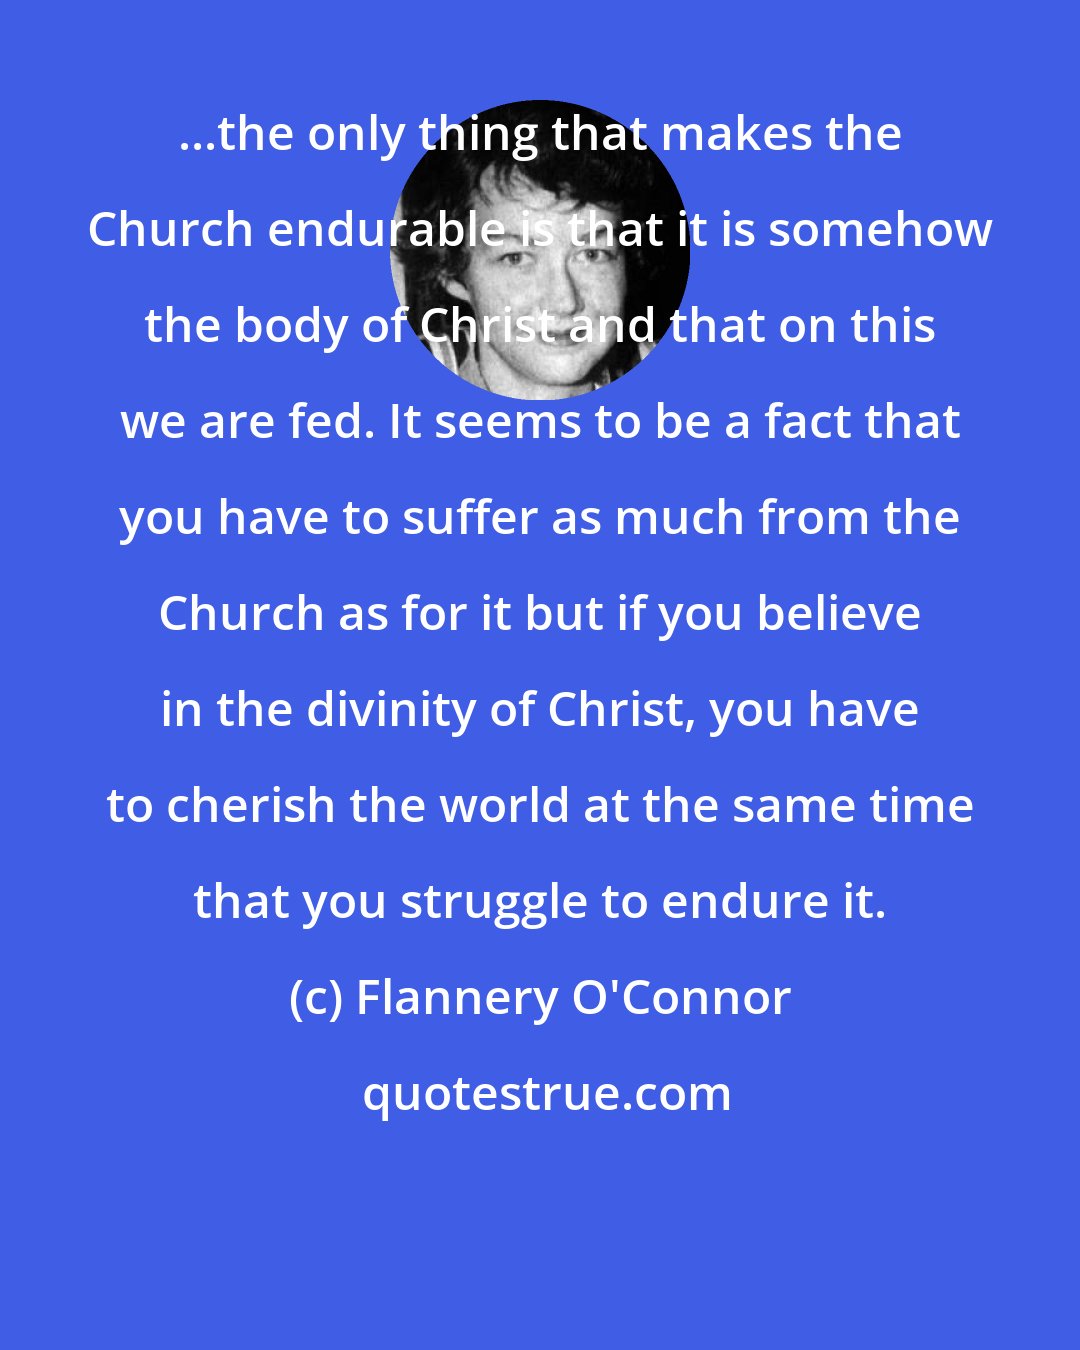 Flannery O'Connor: ...the only thing that makes the Church endurable is that it is somehow the body of Christ and that on this we are fed. It seems to be a fact that you have to suffer as much from the Church as for it but if you believe in the divinity of Christ, you have to cherish the world at the same time that you struggle to endure it.